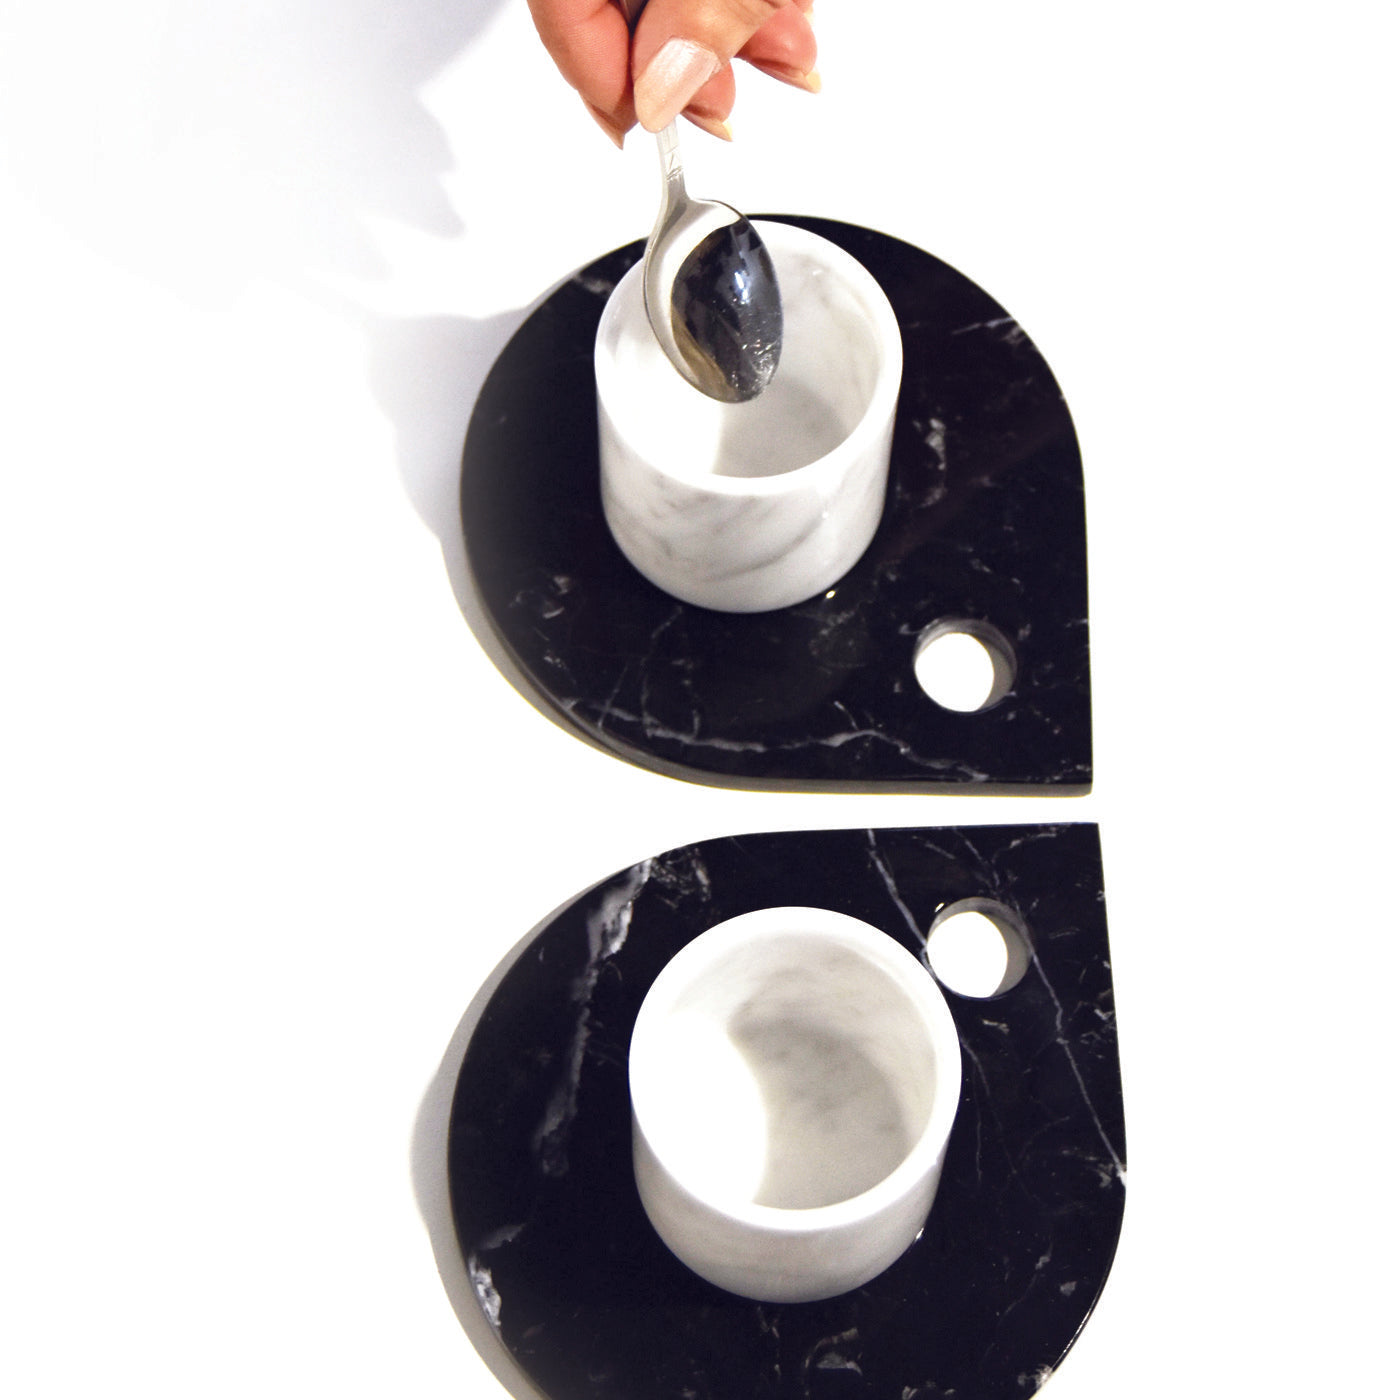 Set of 2 Espresso Cups and Saucers - Alternative view 2